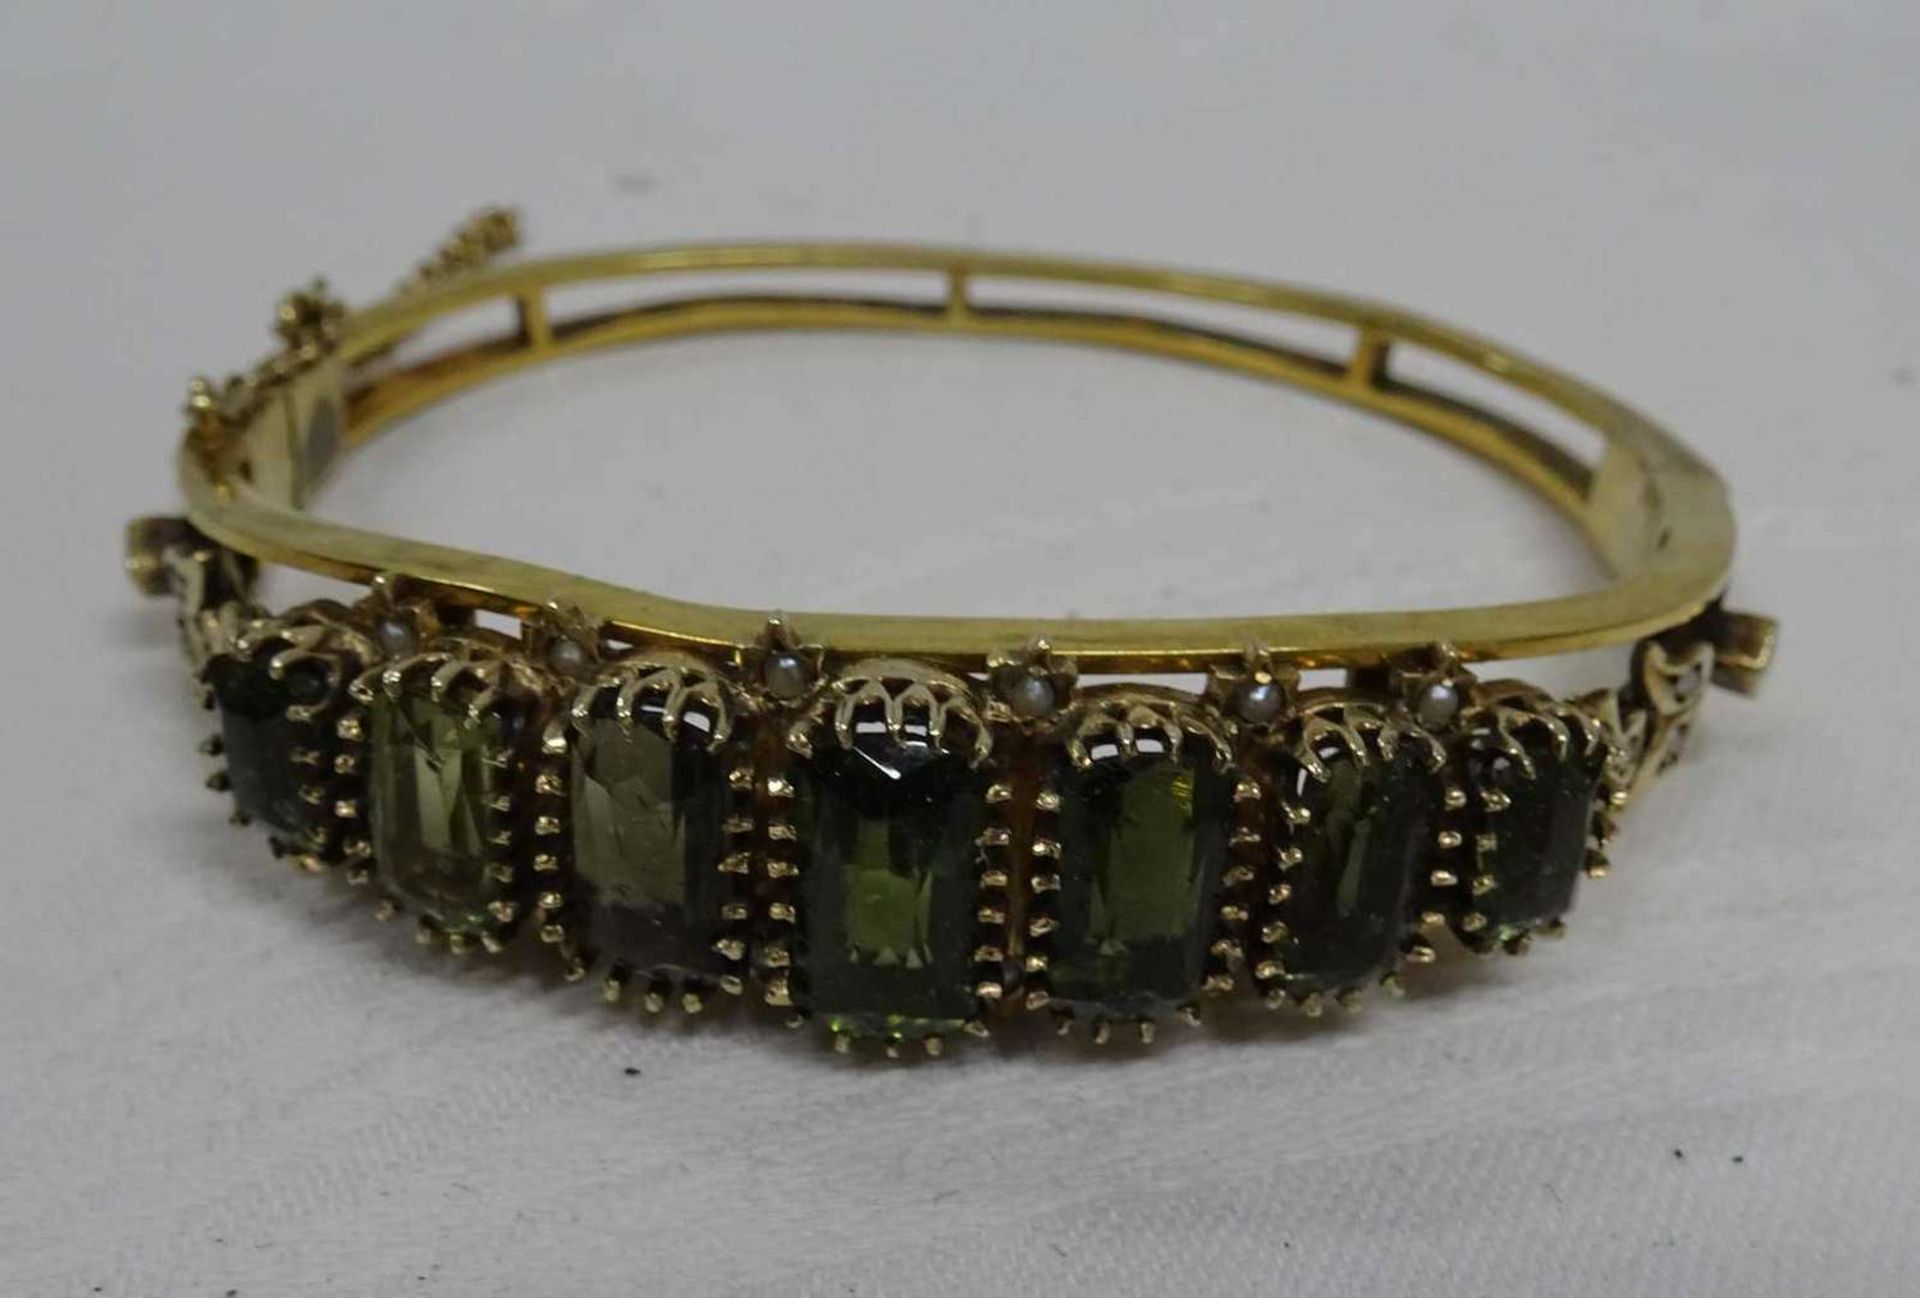 Bangle, gold-plated silver. Set with green glass stones. Diameter approx. 6 cm. With safety chain.